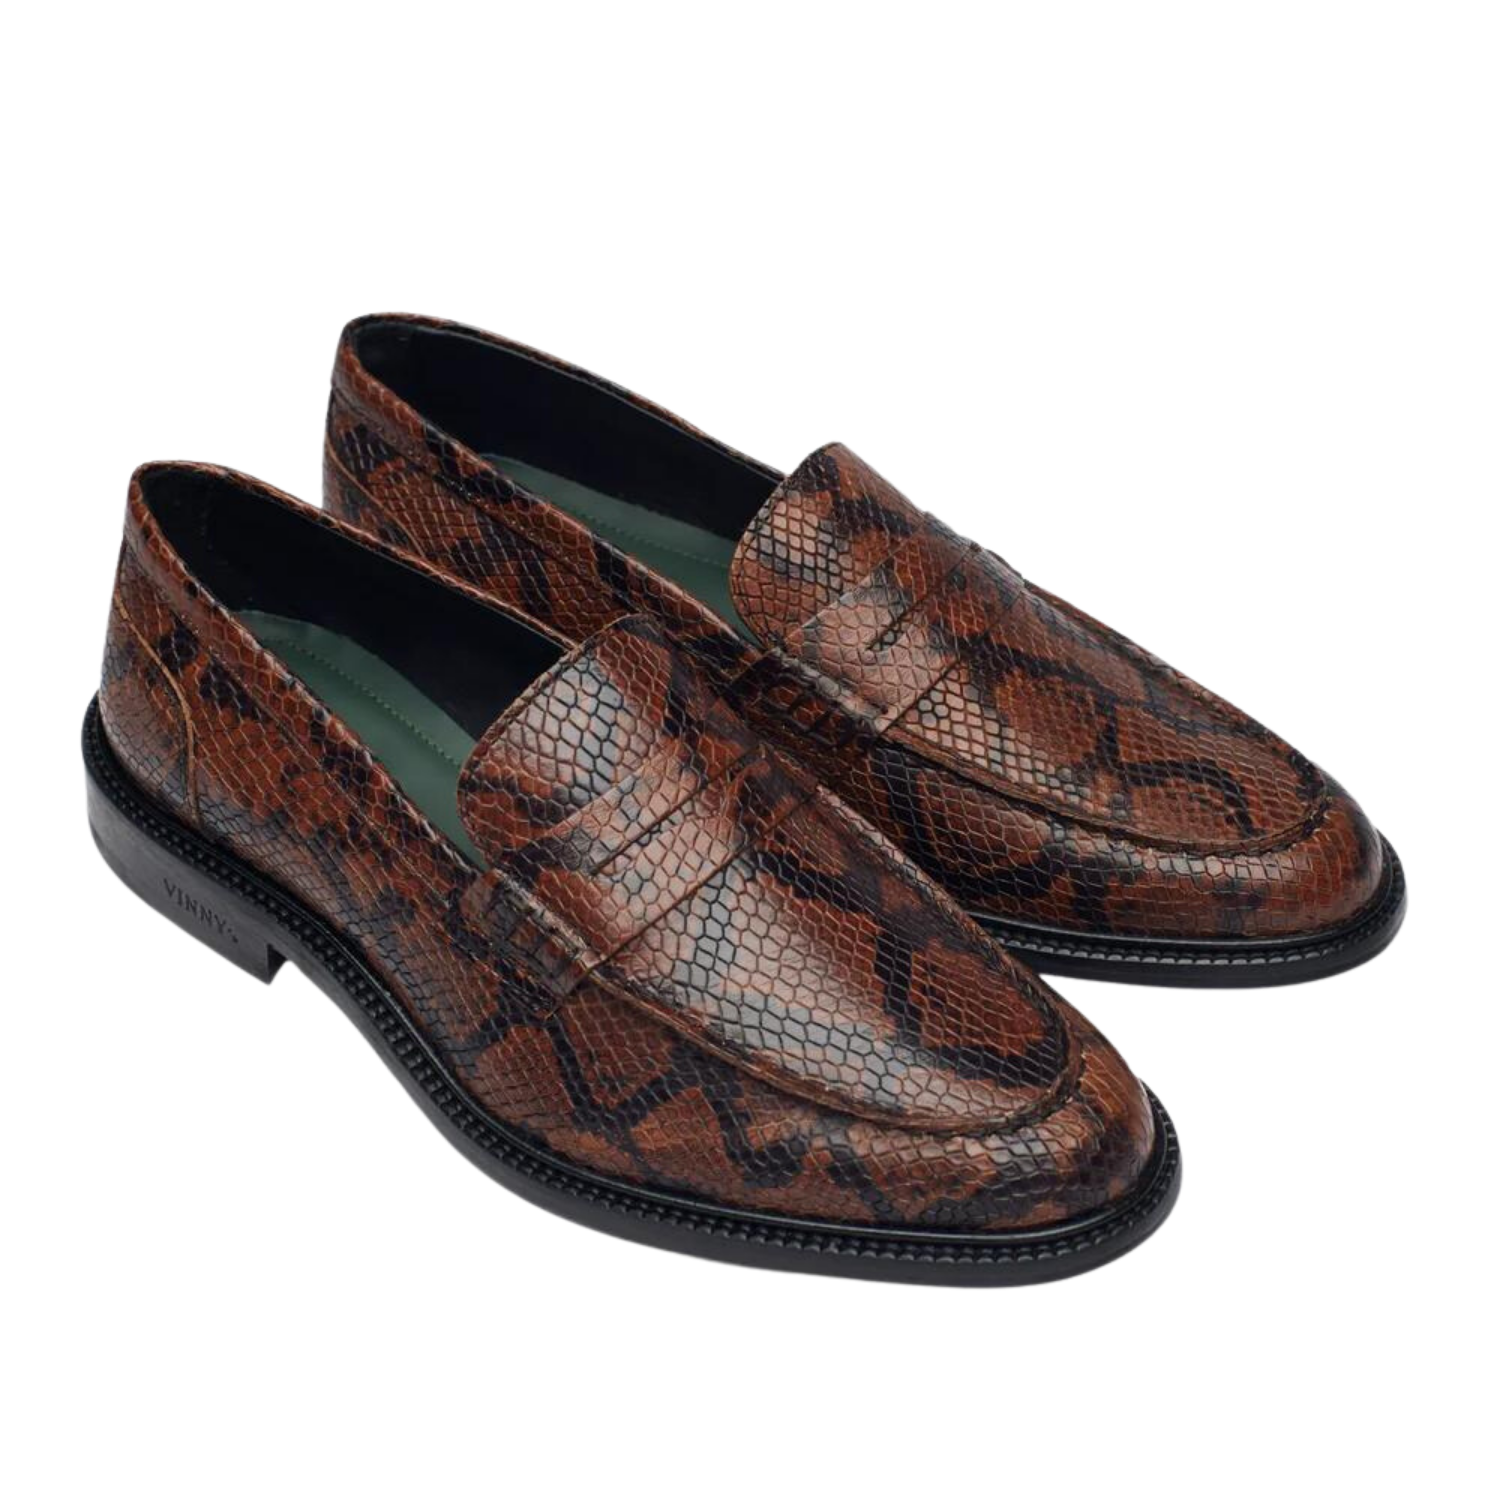 TOWNEE PENNY LOAFER - BROWN PYTHON I VINNY'S - Momentum Clothing